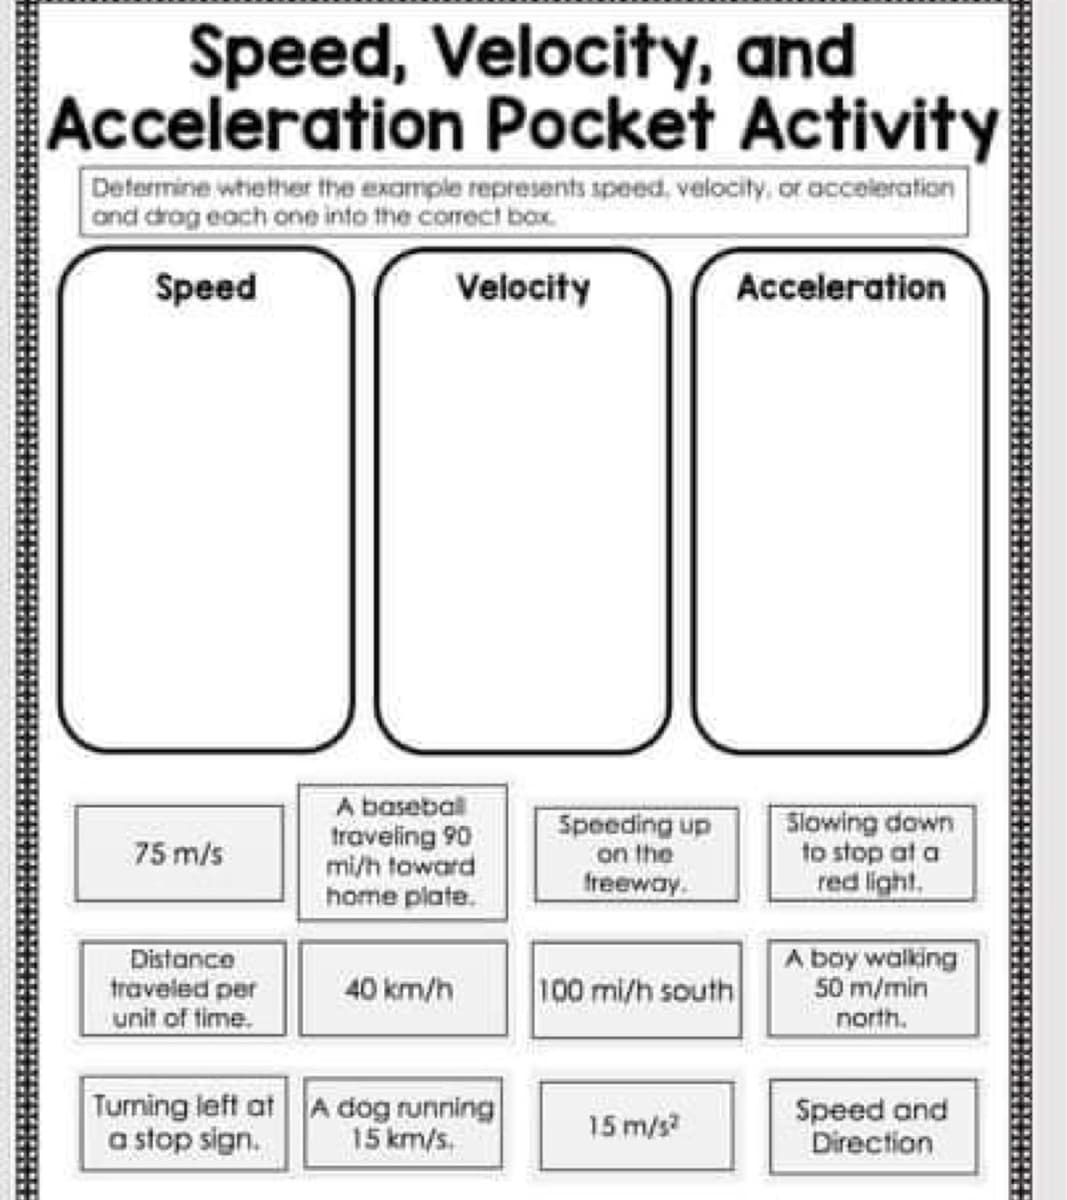 Speed, Velocity, and
Acceleration Pocket Activity
Determine whiether the example represents speed, velocity, or acceleration
ond drog each one into the correct boax
Speed
Velocity
Acceleration
A basebal
traveling 90
mi/h toward
home plate.
Speeding up
on the
freeway.
Slowing down
to stop at a
red light.
75 m/s
Distance
traveled per
unit of time.
A boy walking
50 m/min
north.
40 km/h
100 mi/h south
Tuming left at A dog running
a stop sign.
Speed and
Direction
15 km/s.
15 m/s?
